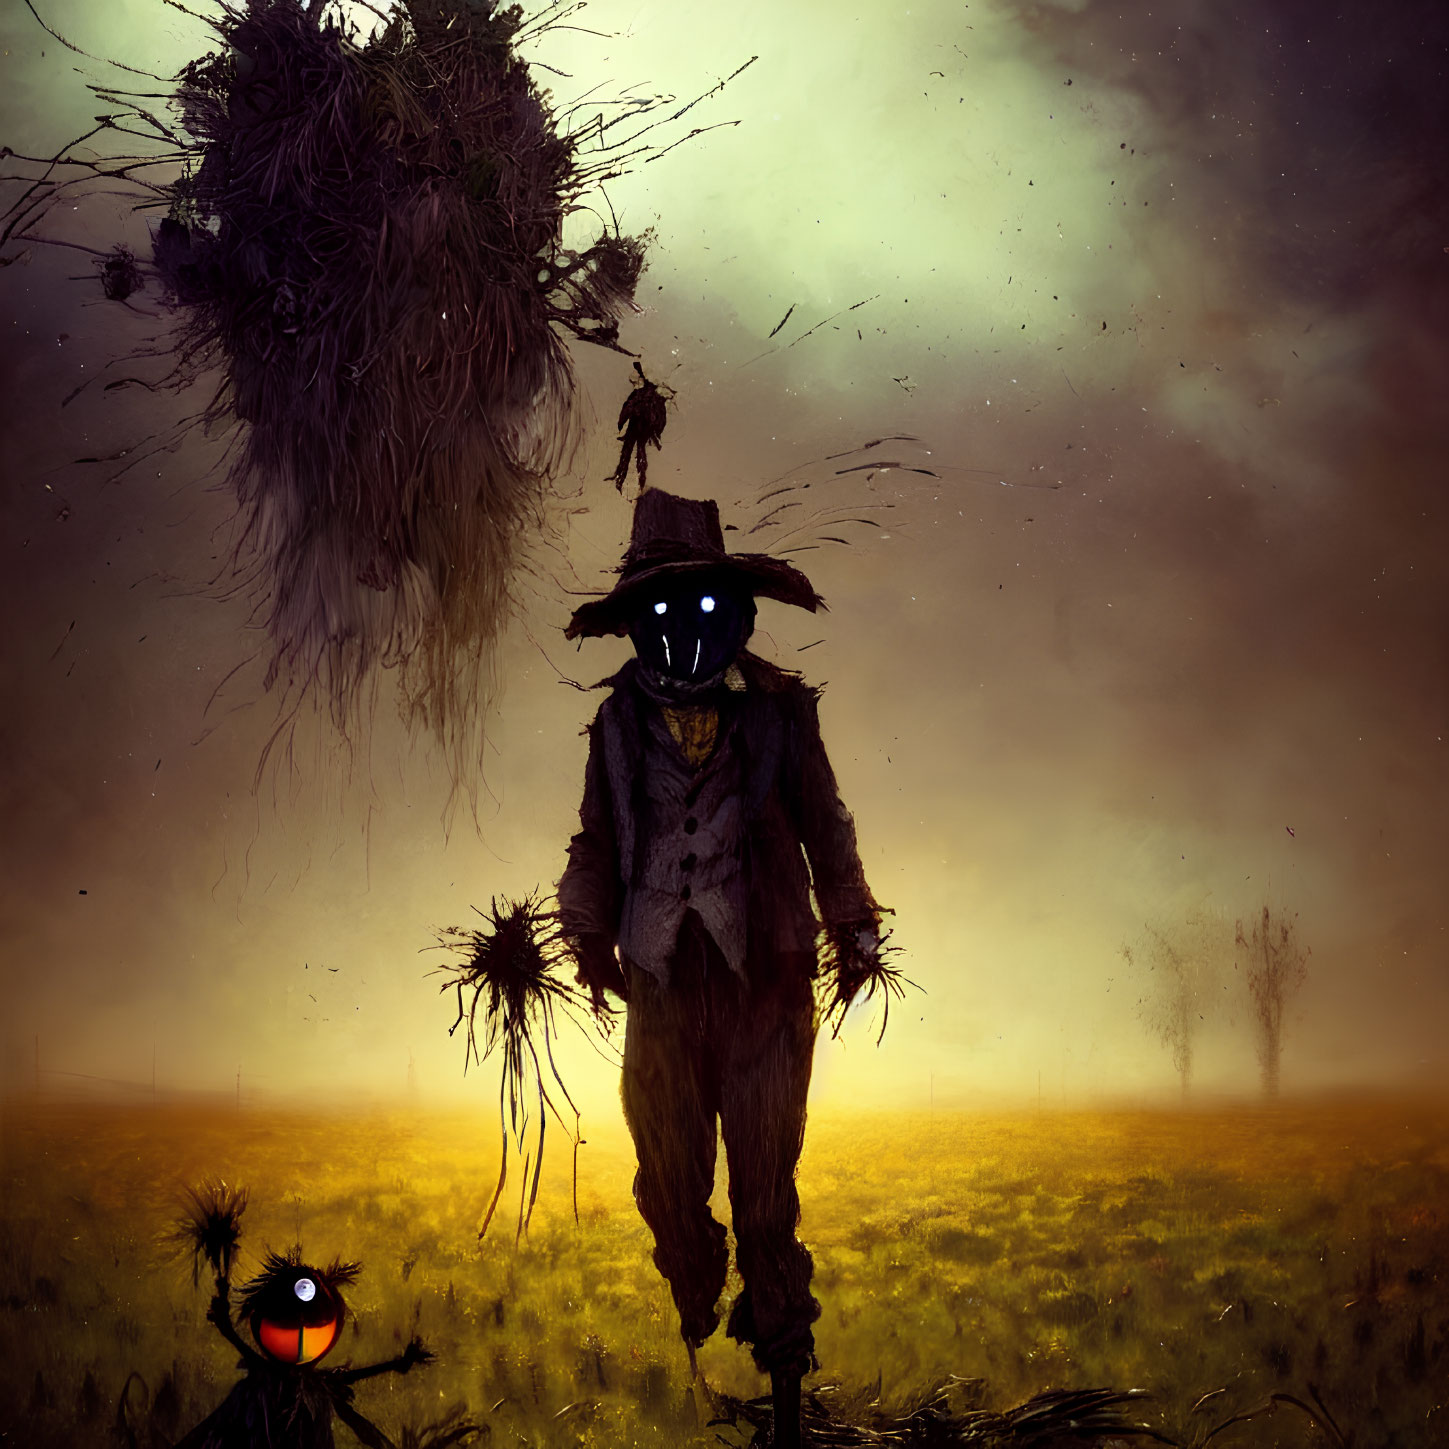 Spooky scarecrow artwork in twilight field with glowing eyes and birds' nest